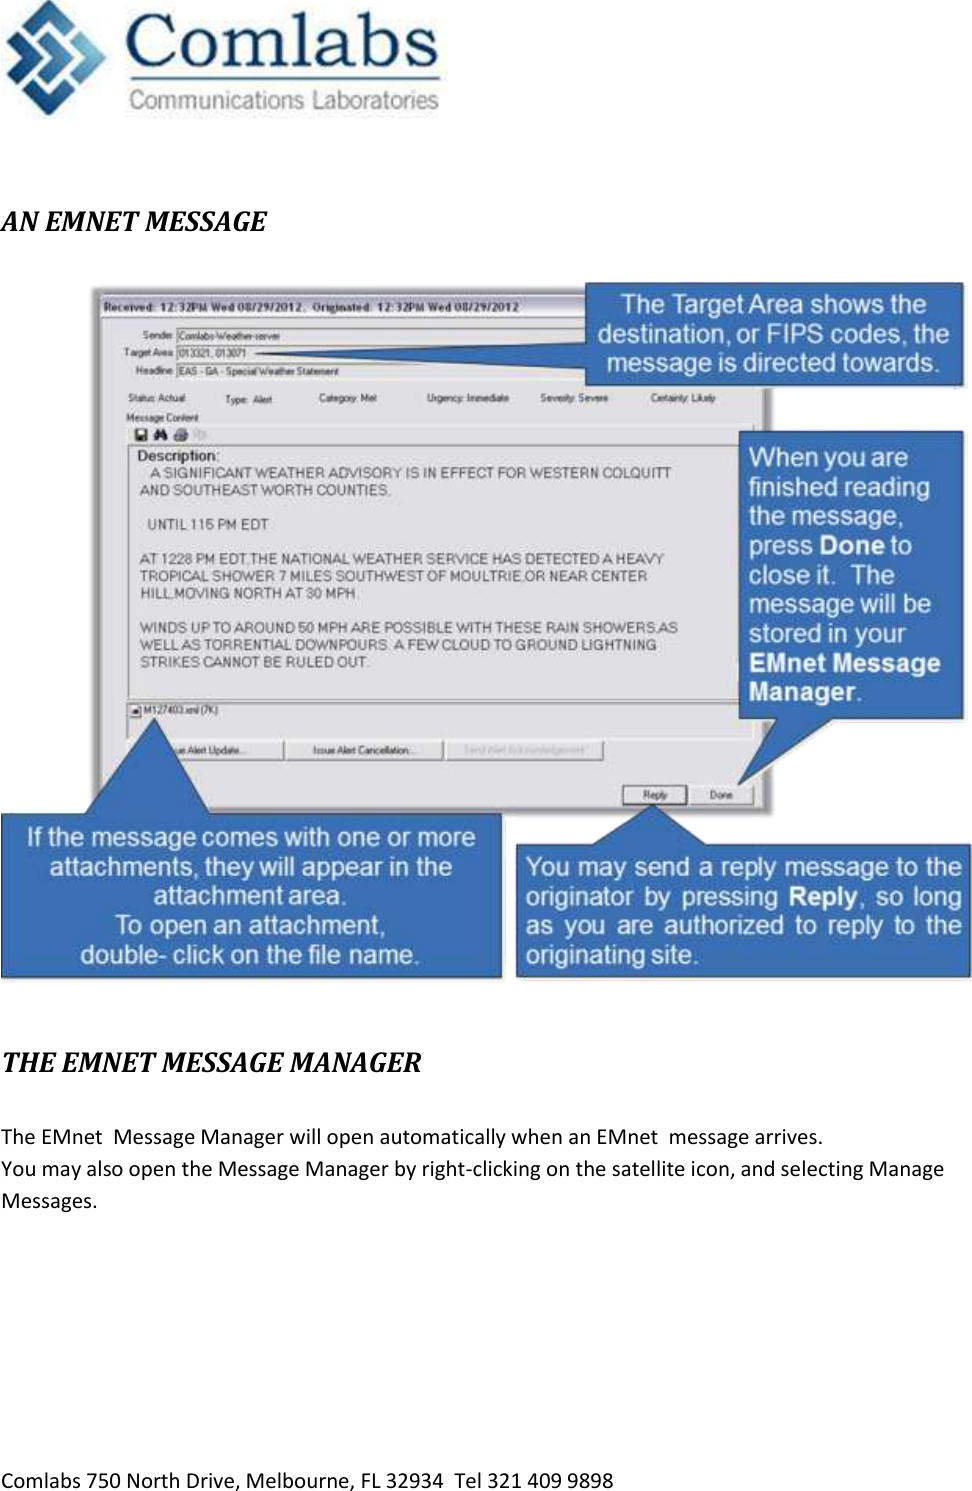   Comlabs 750 North Drive, Melbourne, FL 32934  Tel 321 409 9898  AN EMNET MESSAGE    THE EMNET MESSAGE MANAGER  The EMnet  Message Manager will open automatically when an EMnet  message arrives.  You may also open the Message Manager by right-clicking on the satellite icon, and selecting Manage Messages. 